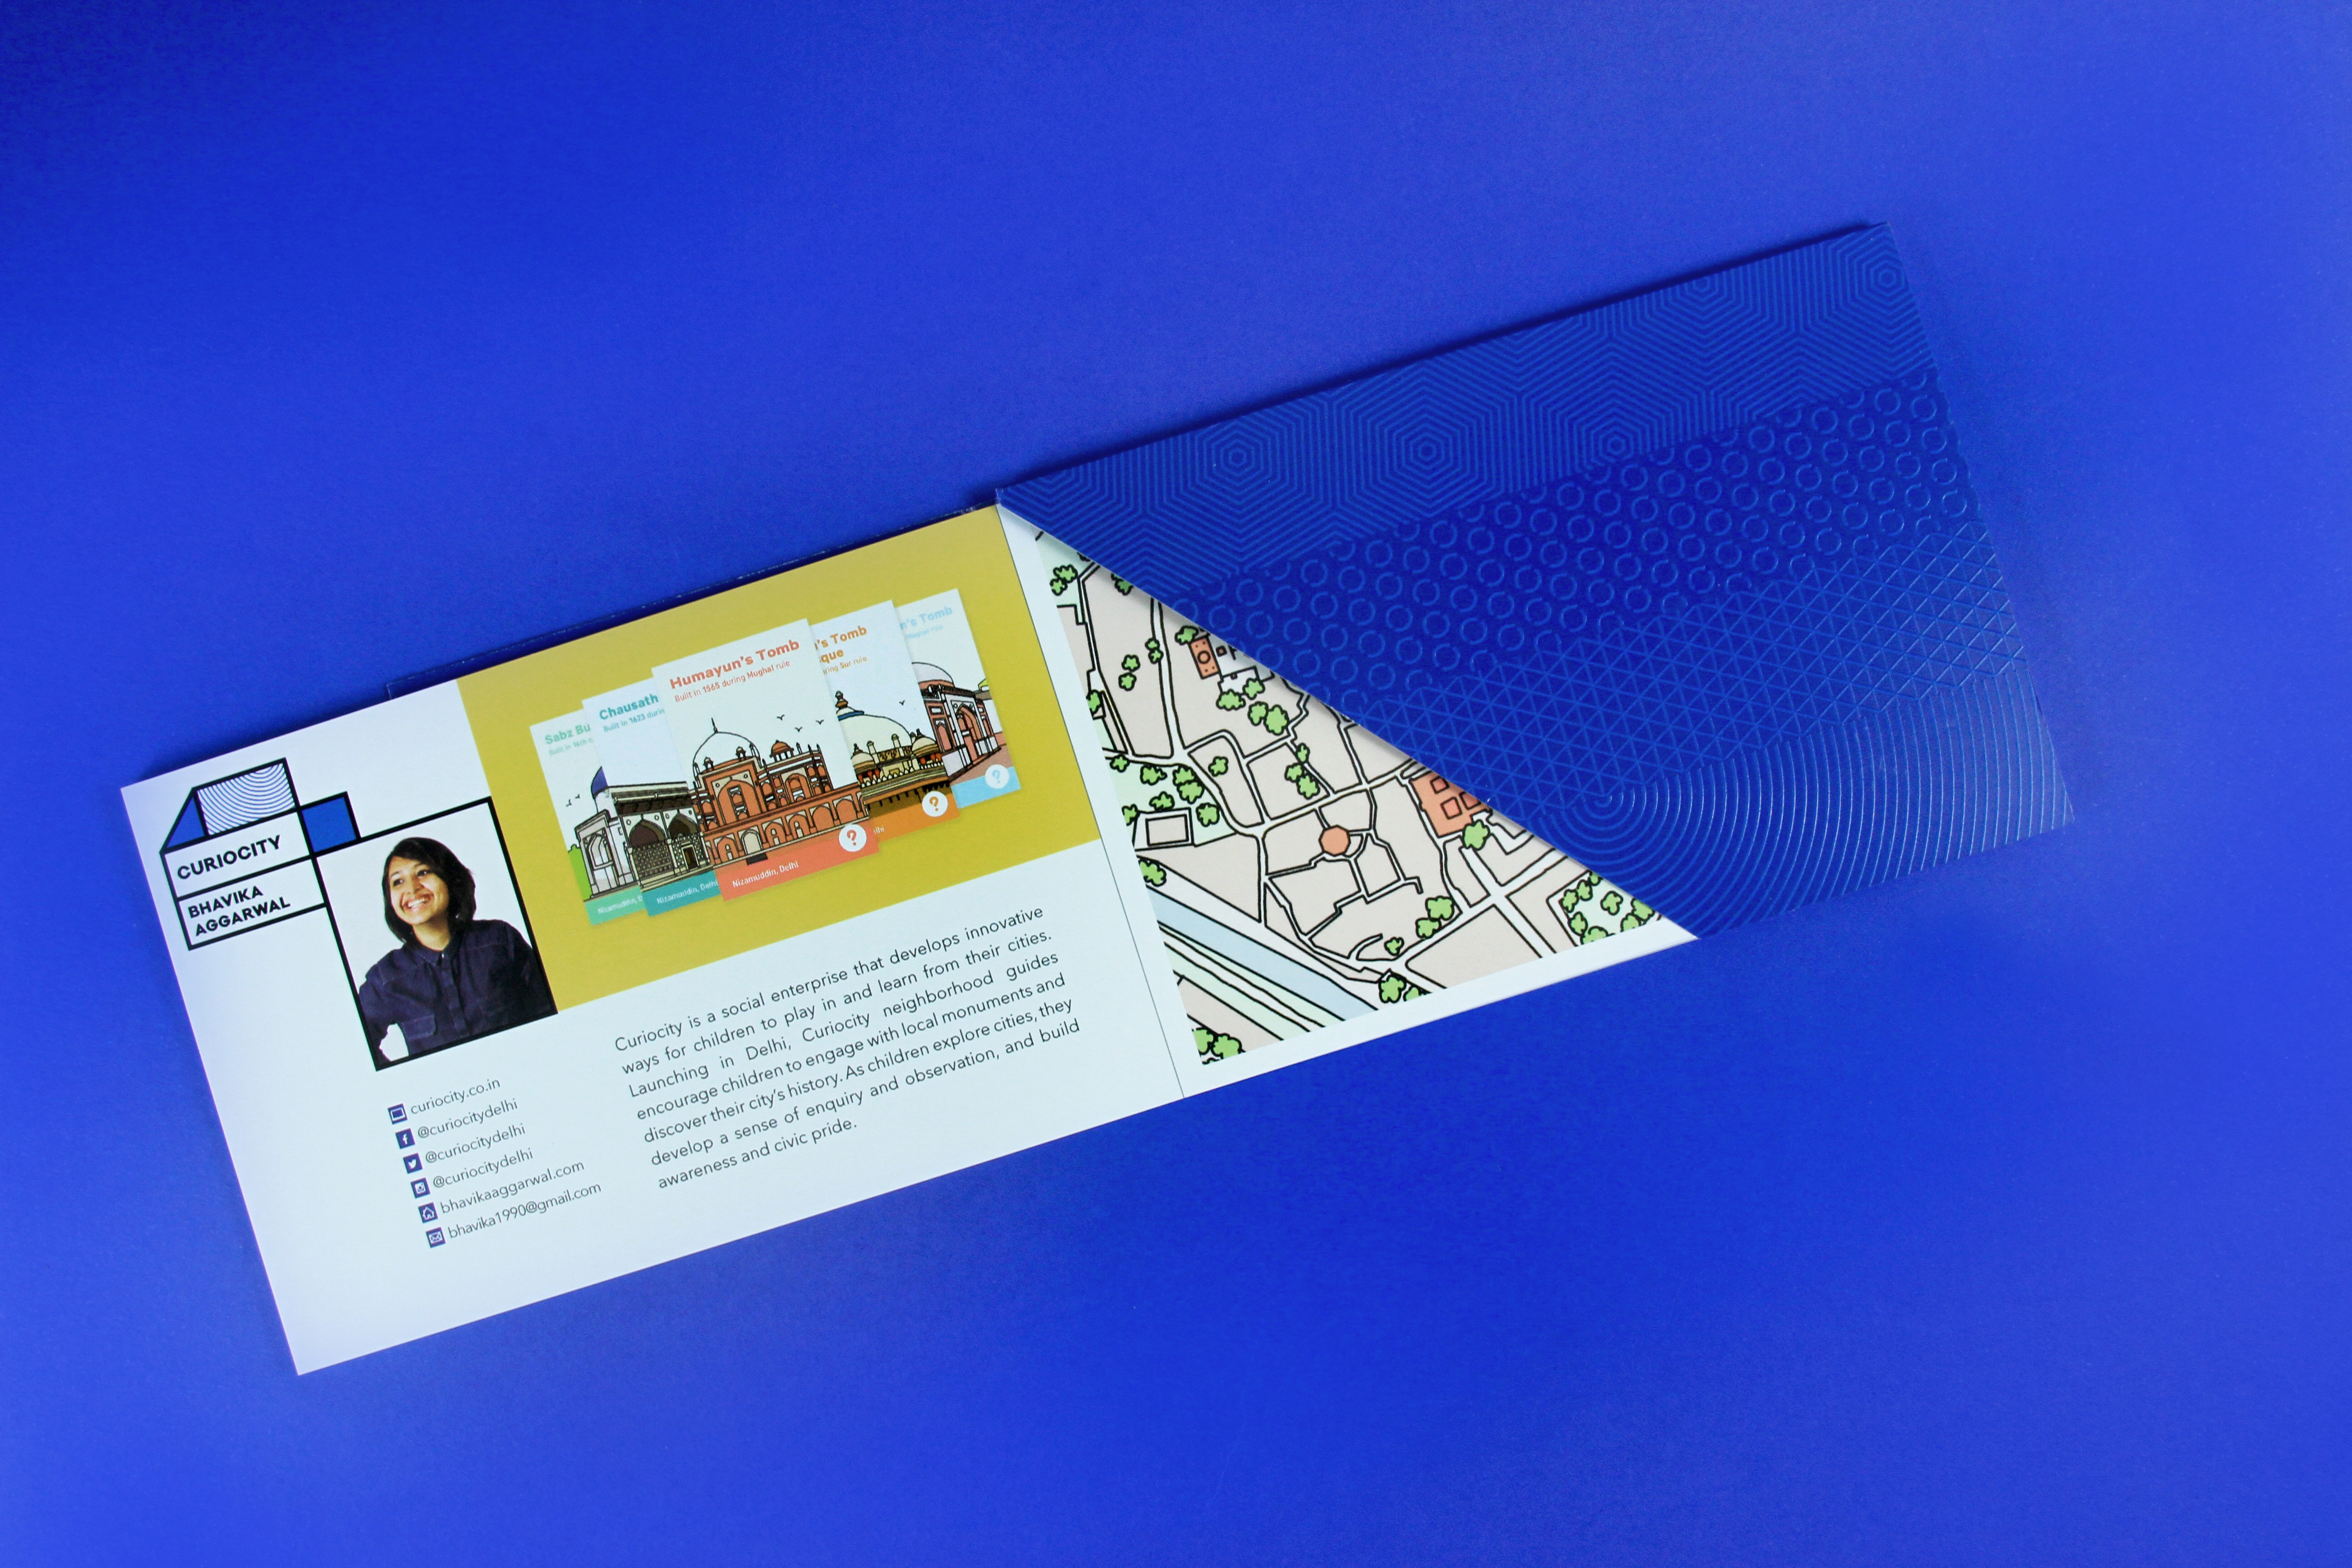 An image of a folded flyer in a blue envelope. On the flyer there is a picture of an Indian woman, the text curiocity, some Indian building drawings and a map of a city.